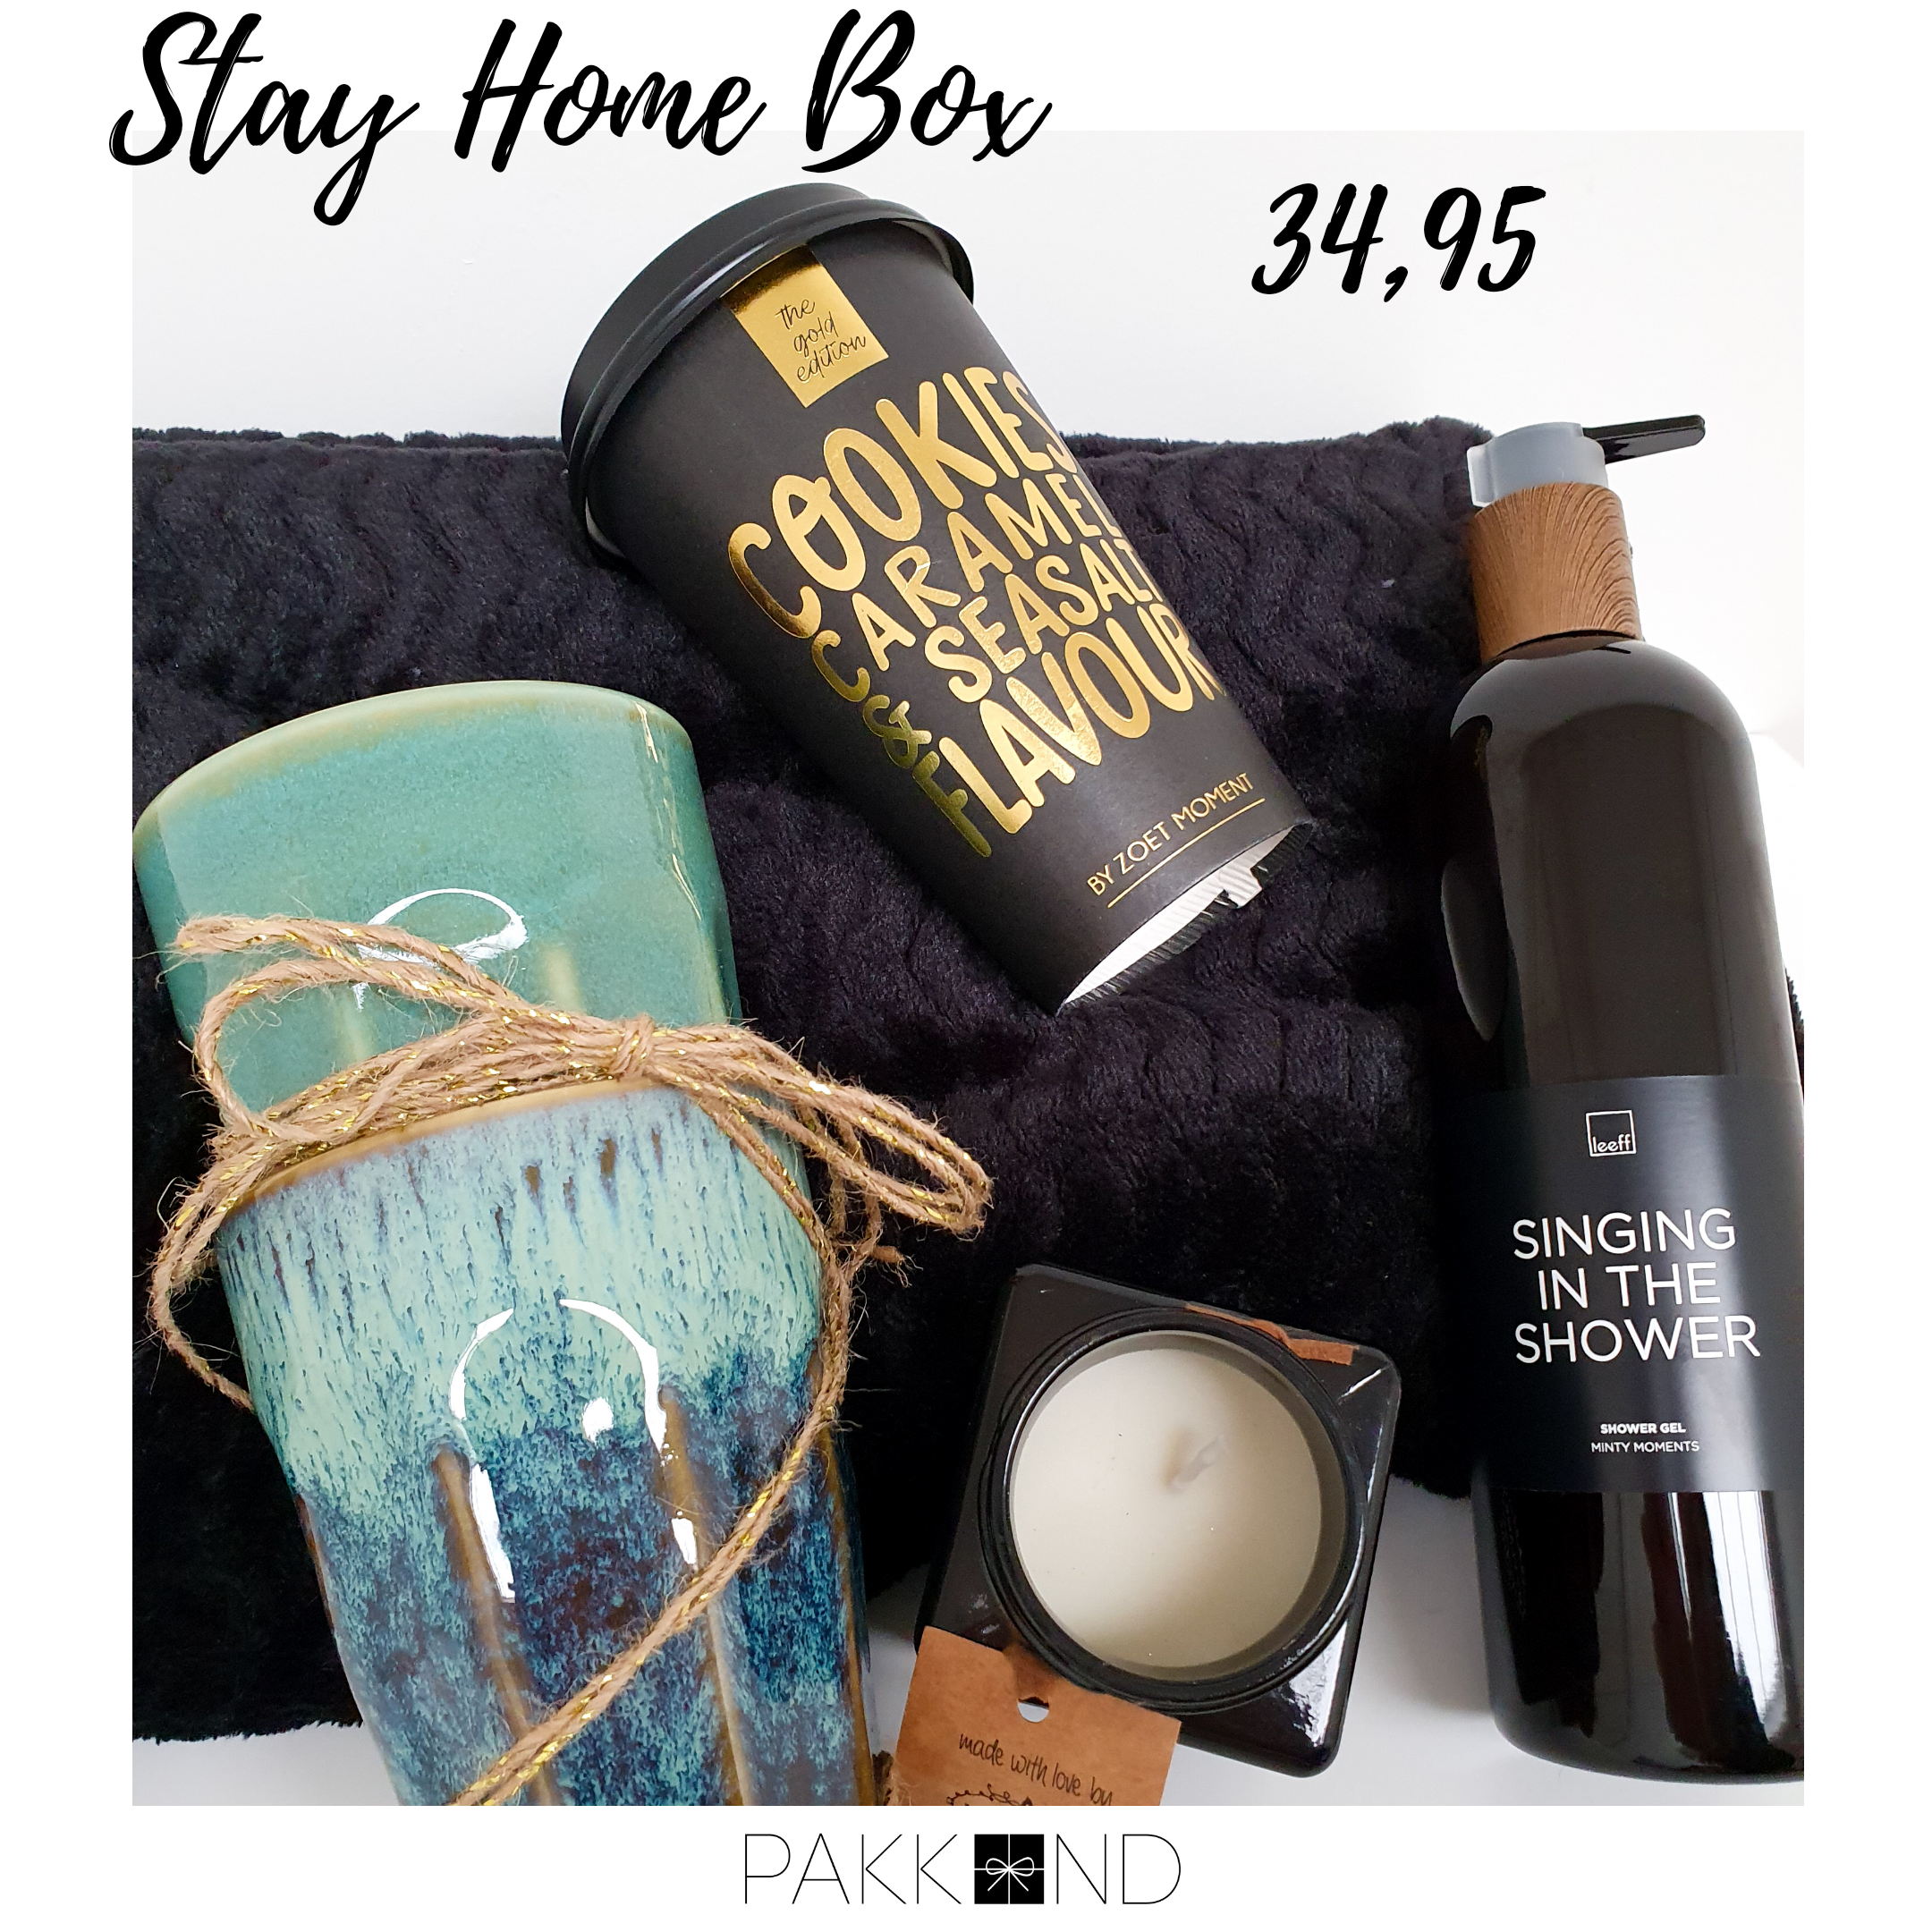 Stay Home Box 1